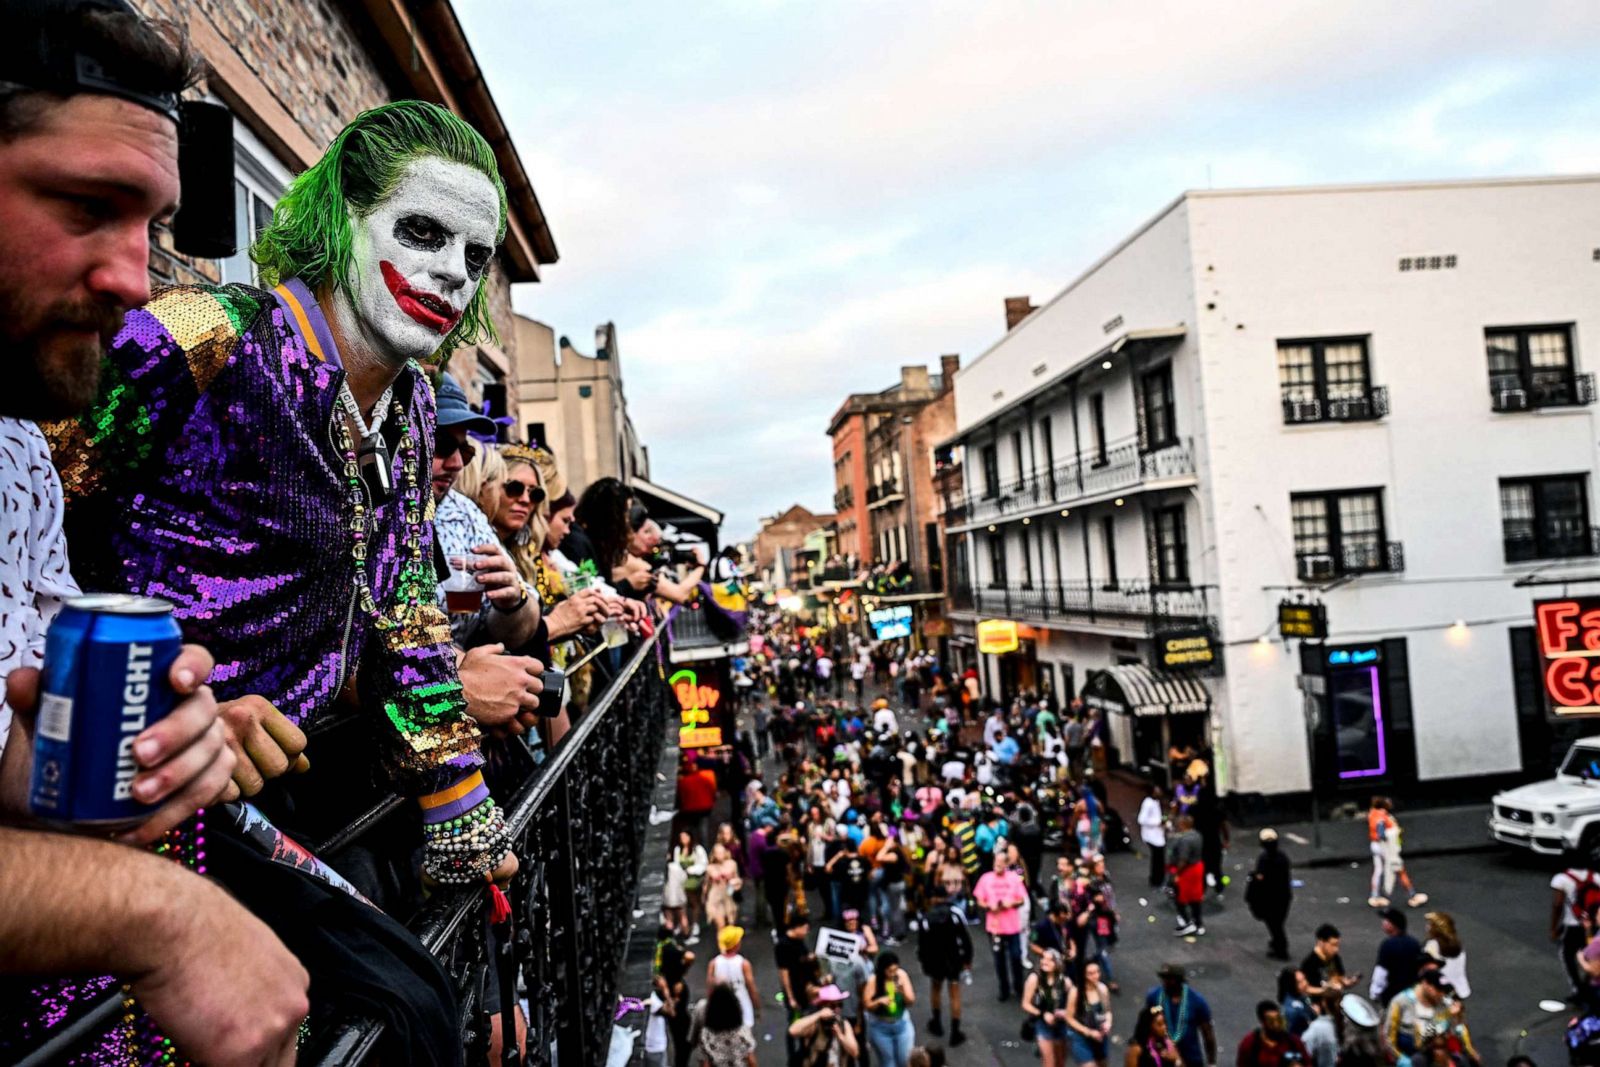 Mardi Gras celebrations in New Orleans Photos Image 11 ABC News